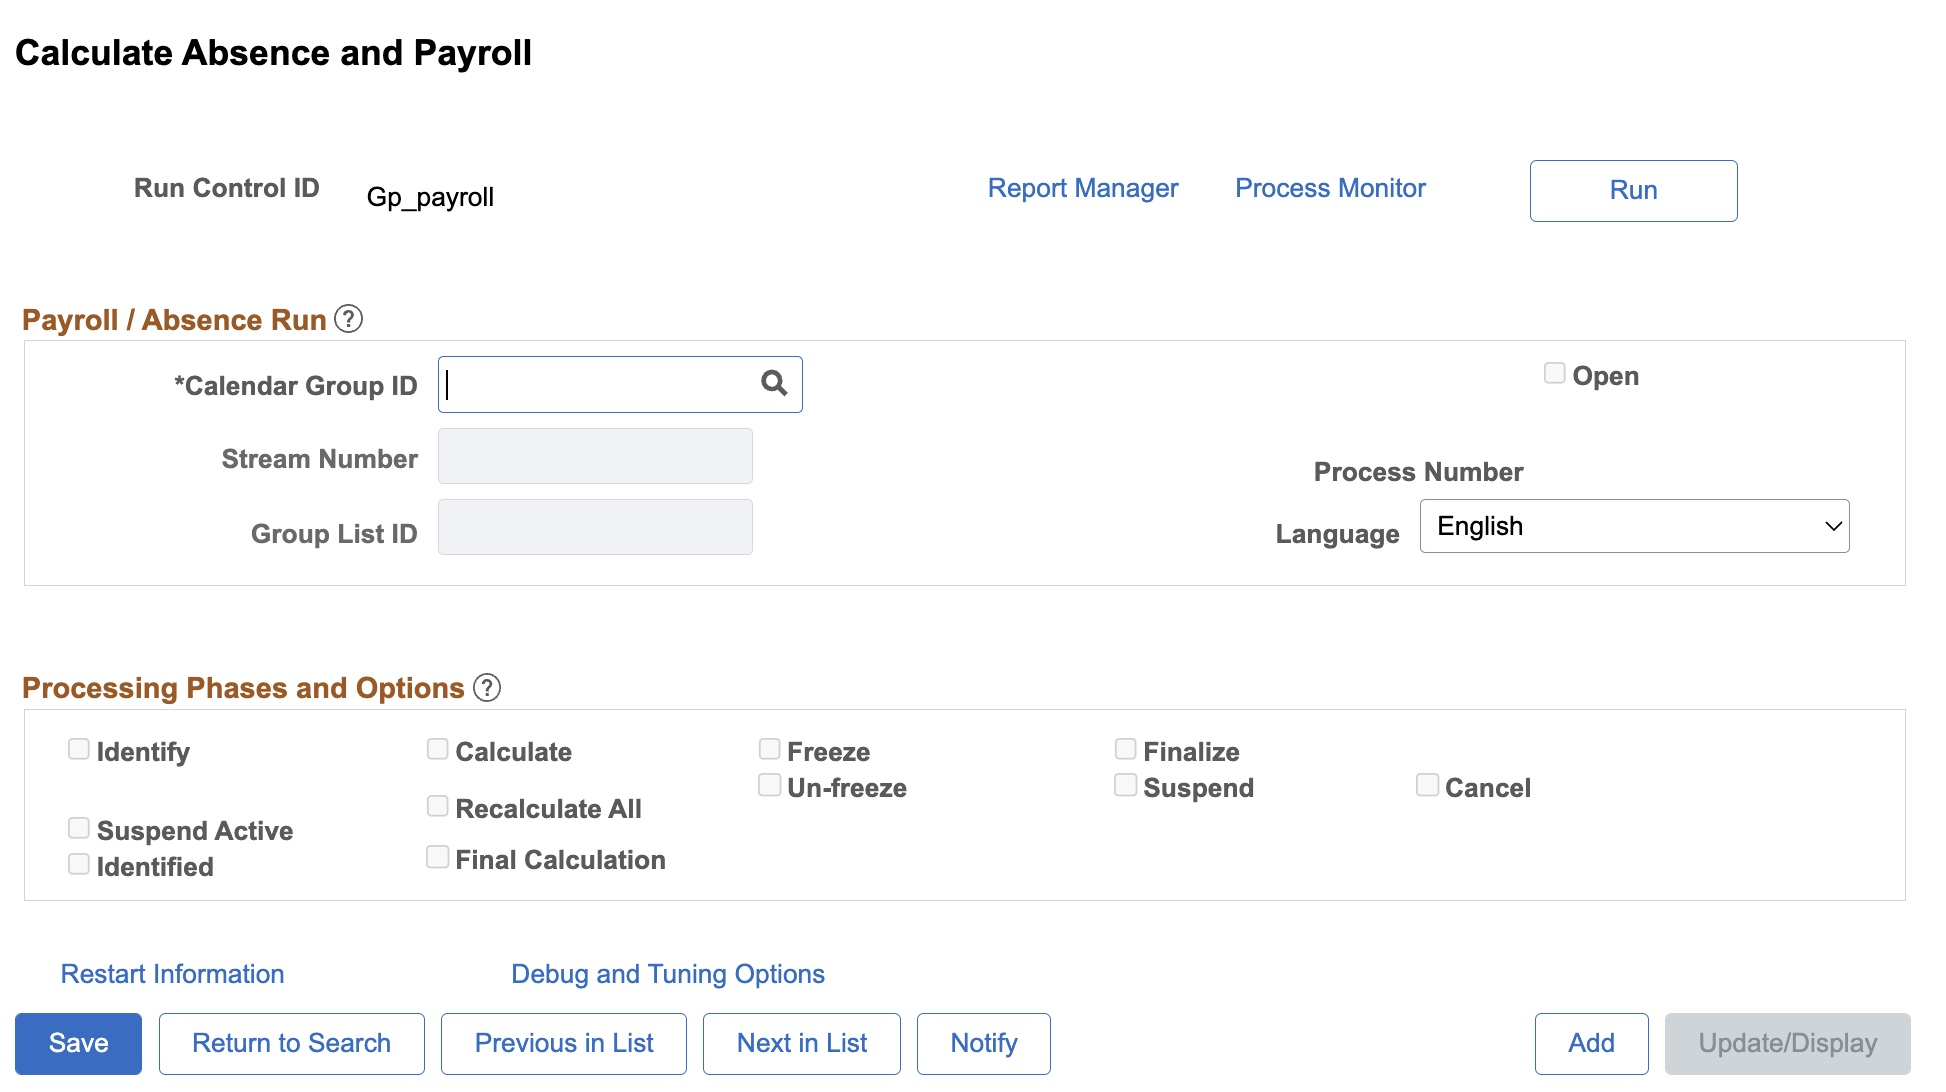 Calculate Absence and Payroll page